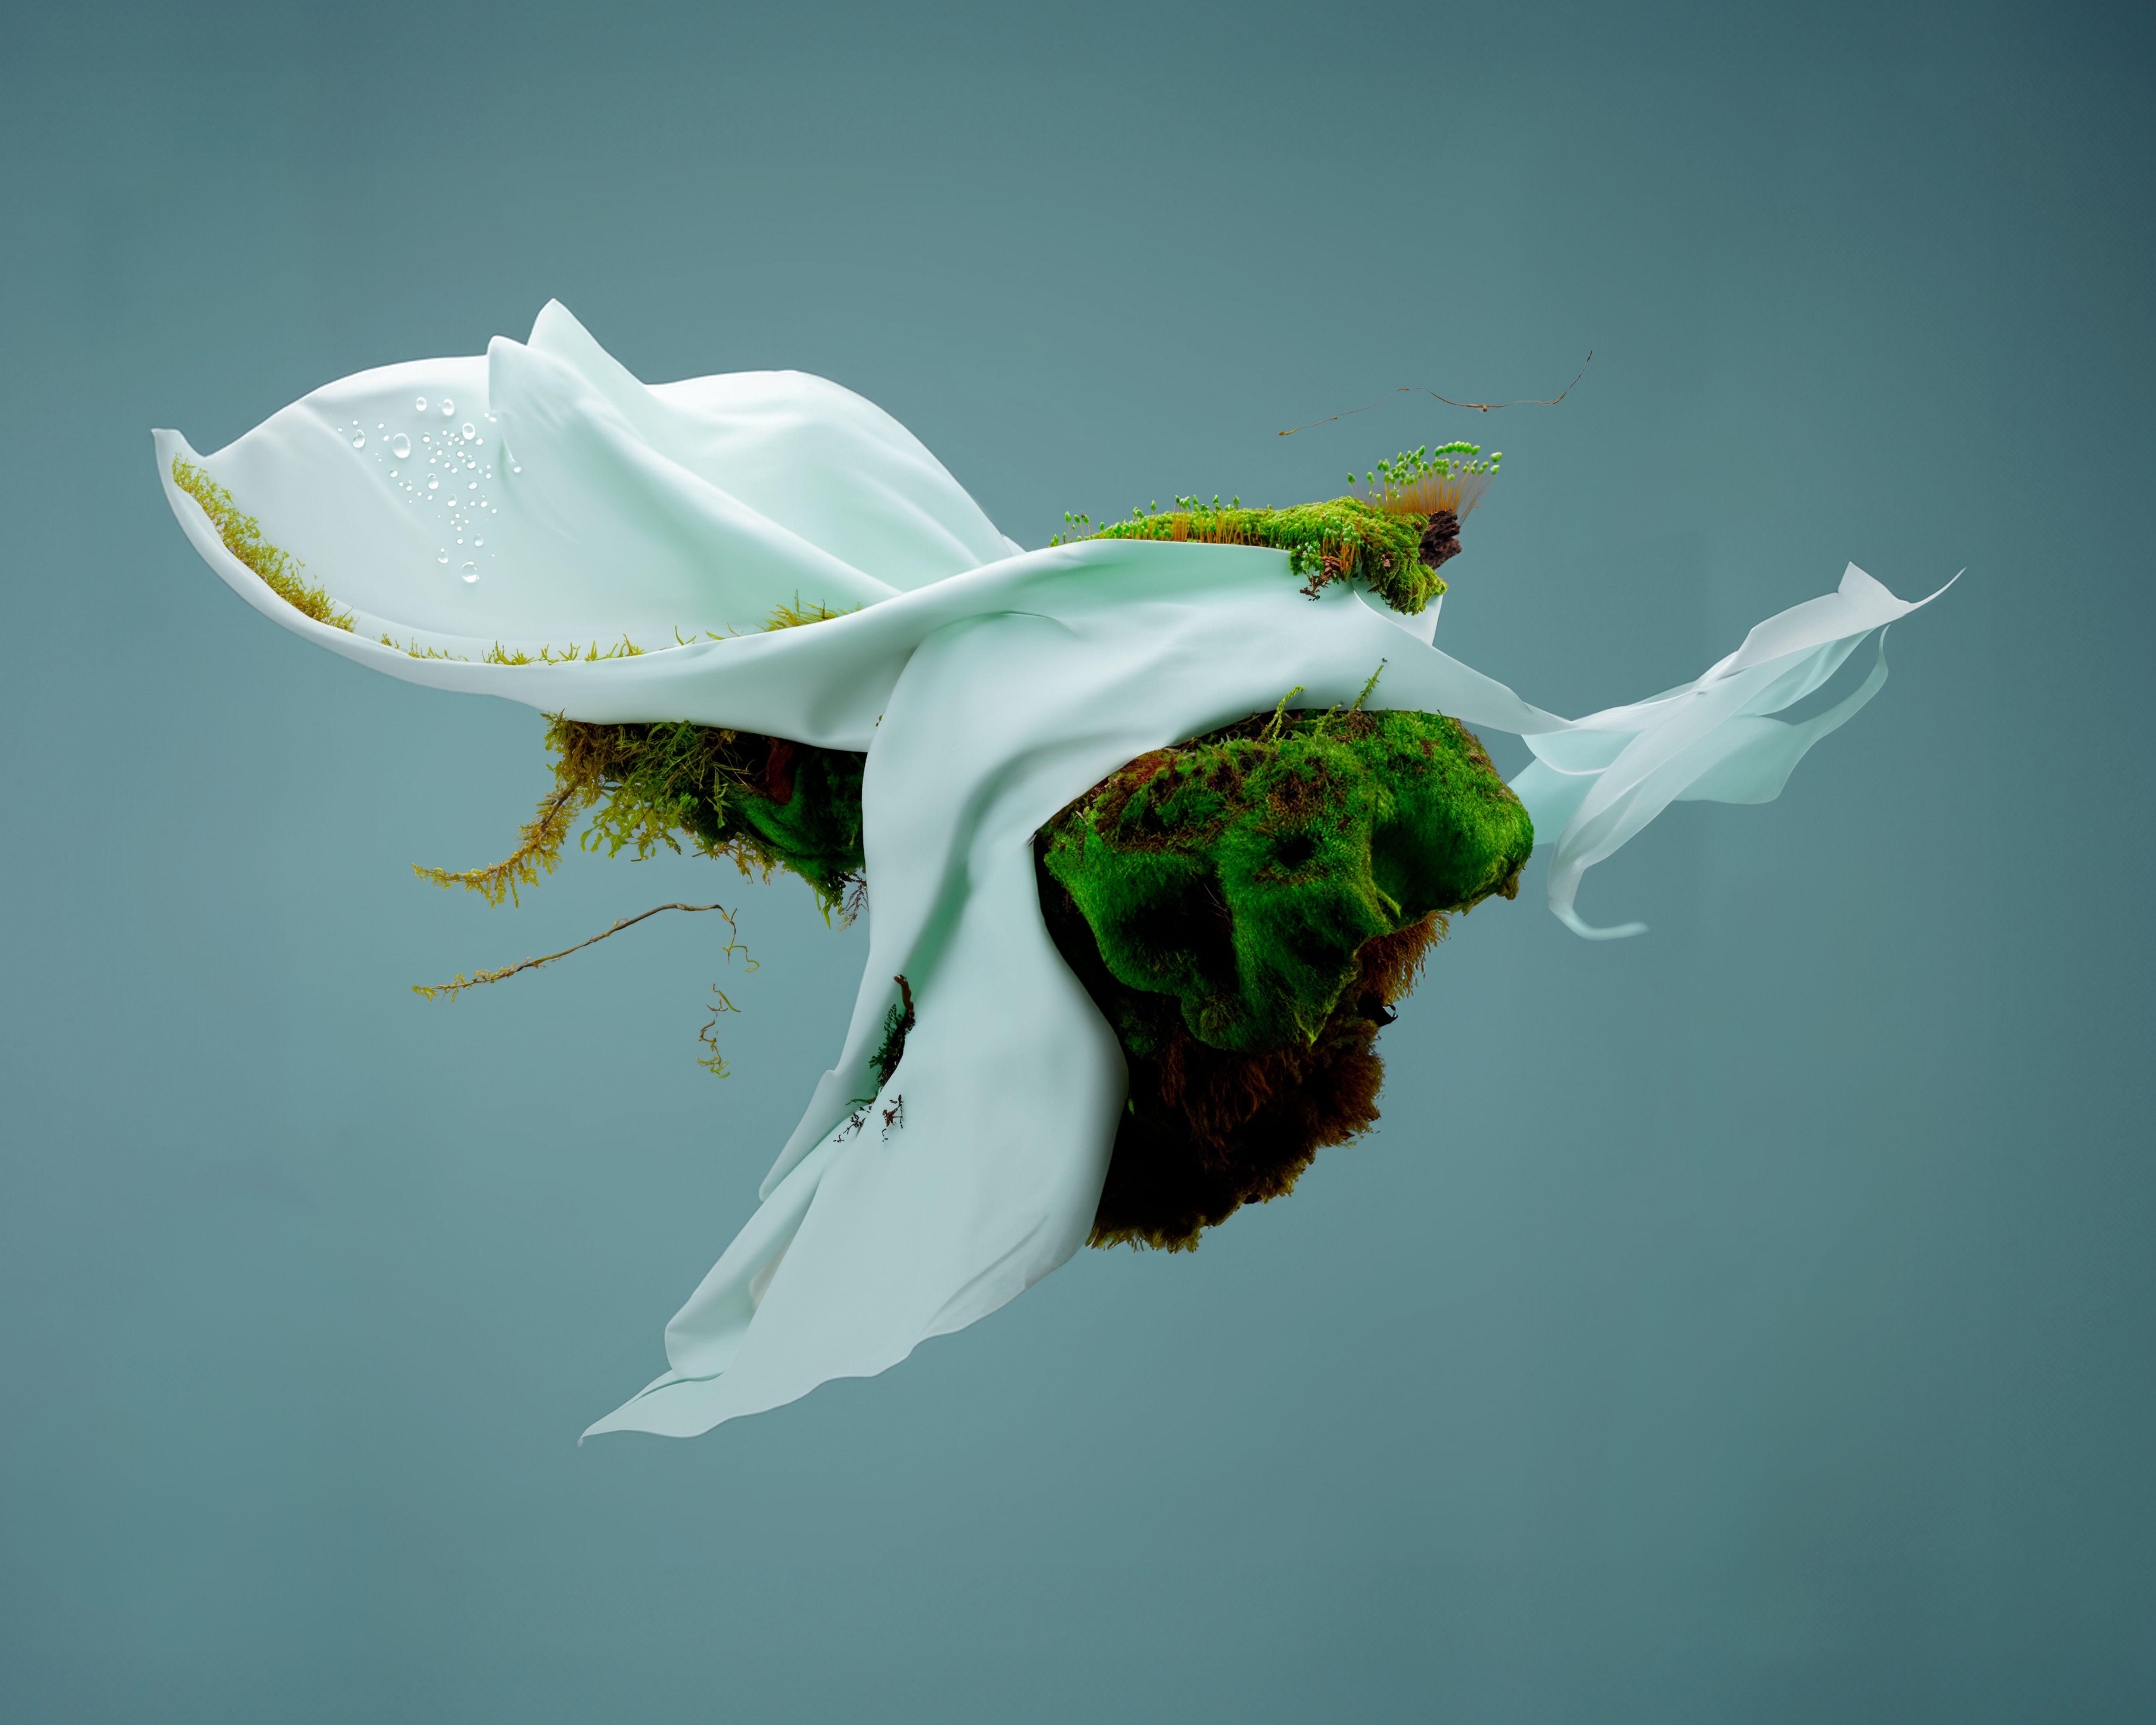 A floating bit of earth and moss draped in fabric